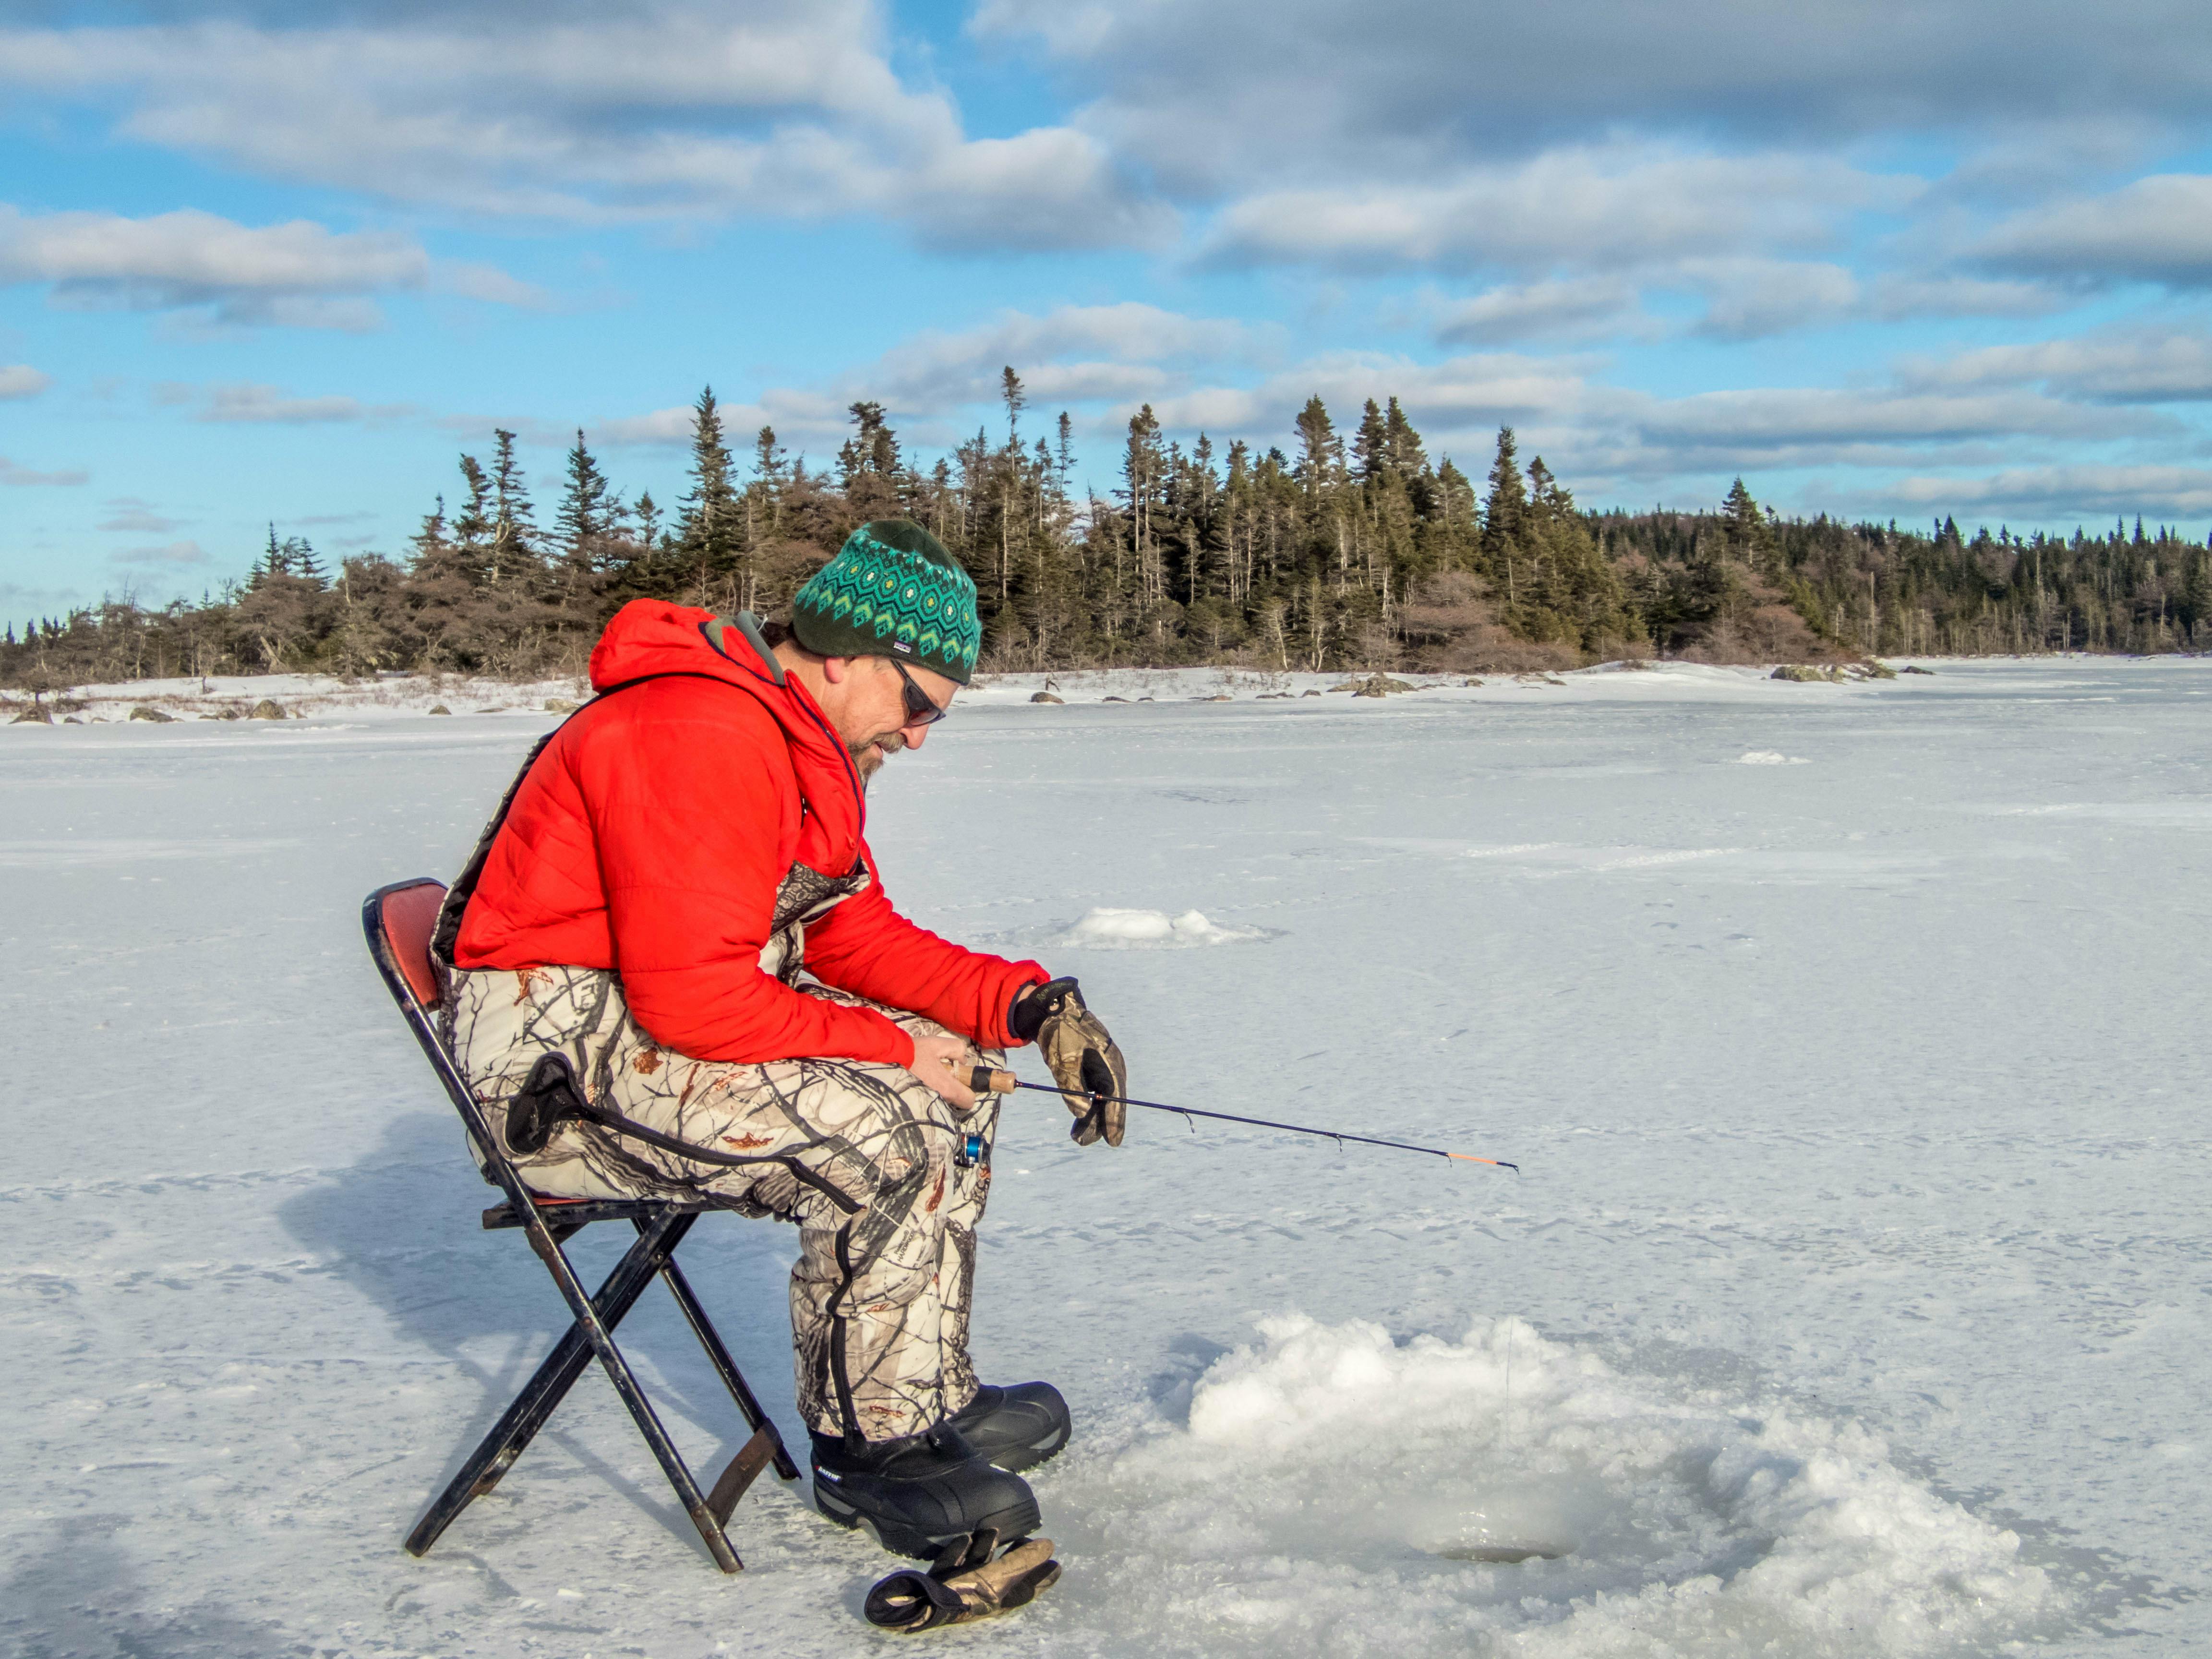 PAUL SMITH: More on boots, ice fishing and Antarctica